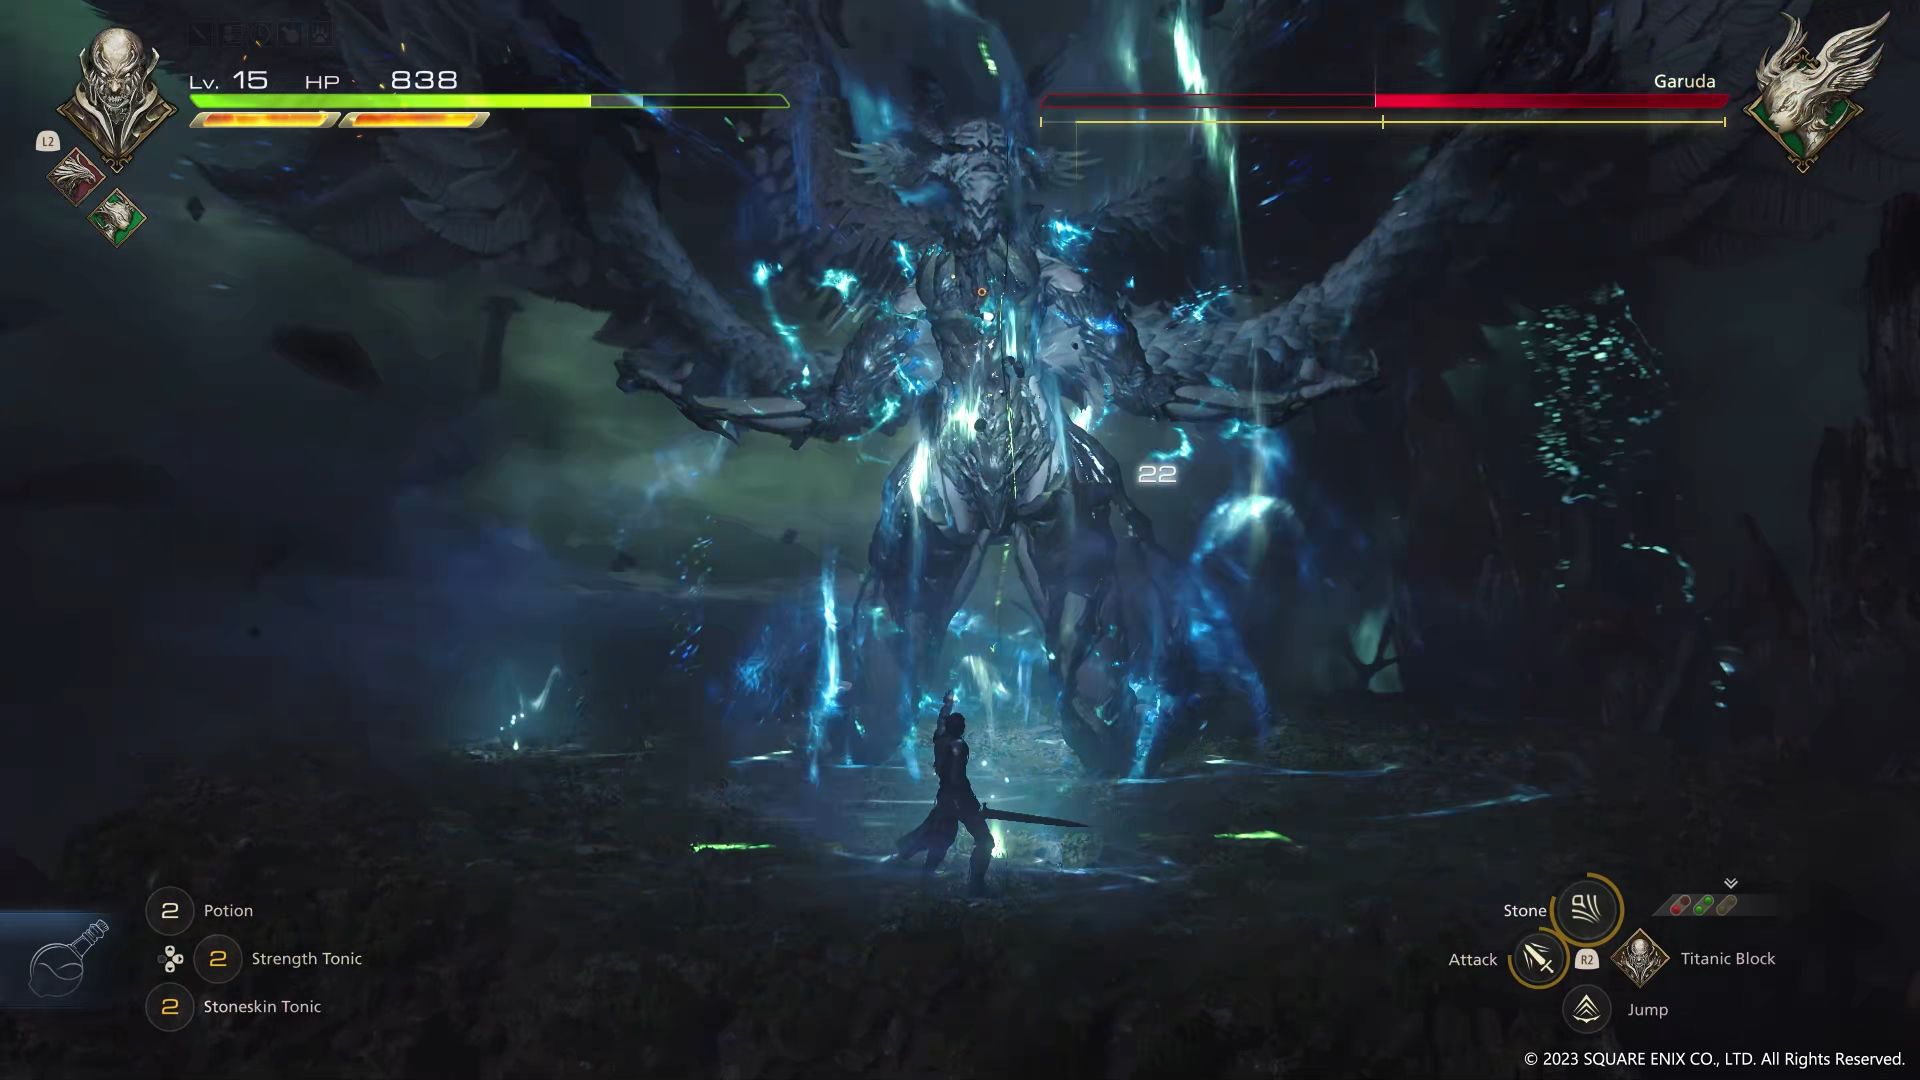 A screenshot from a Final Fantasy 16 gameplay preview, showing main character Clive battling against the Eikon Garuda.